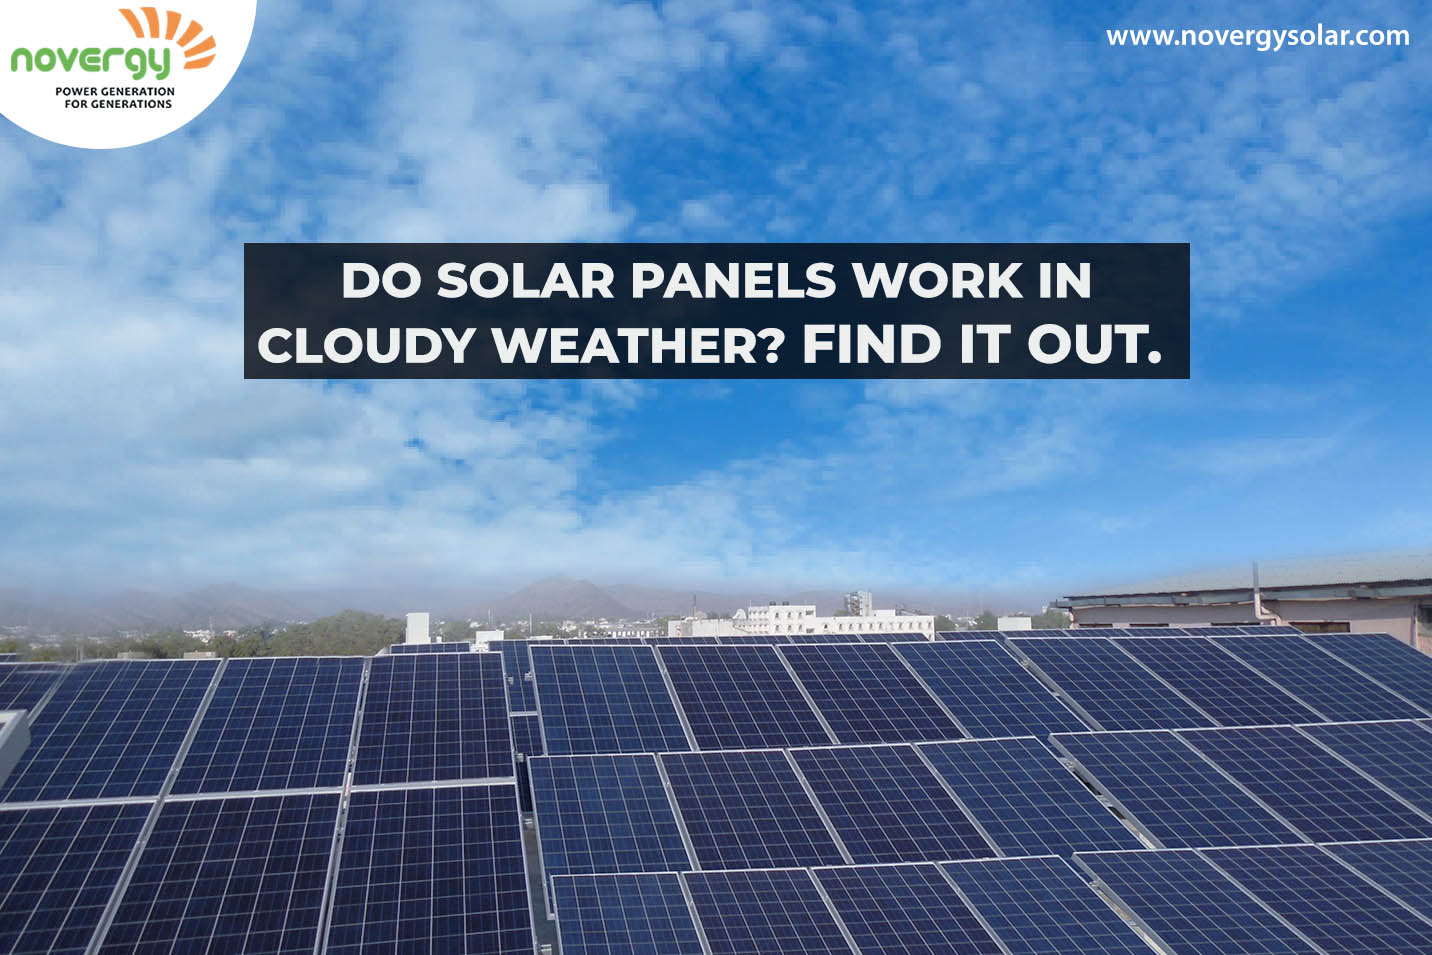 Do solar panels work in cloudy weather?